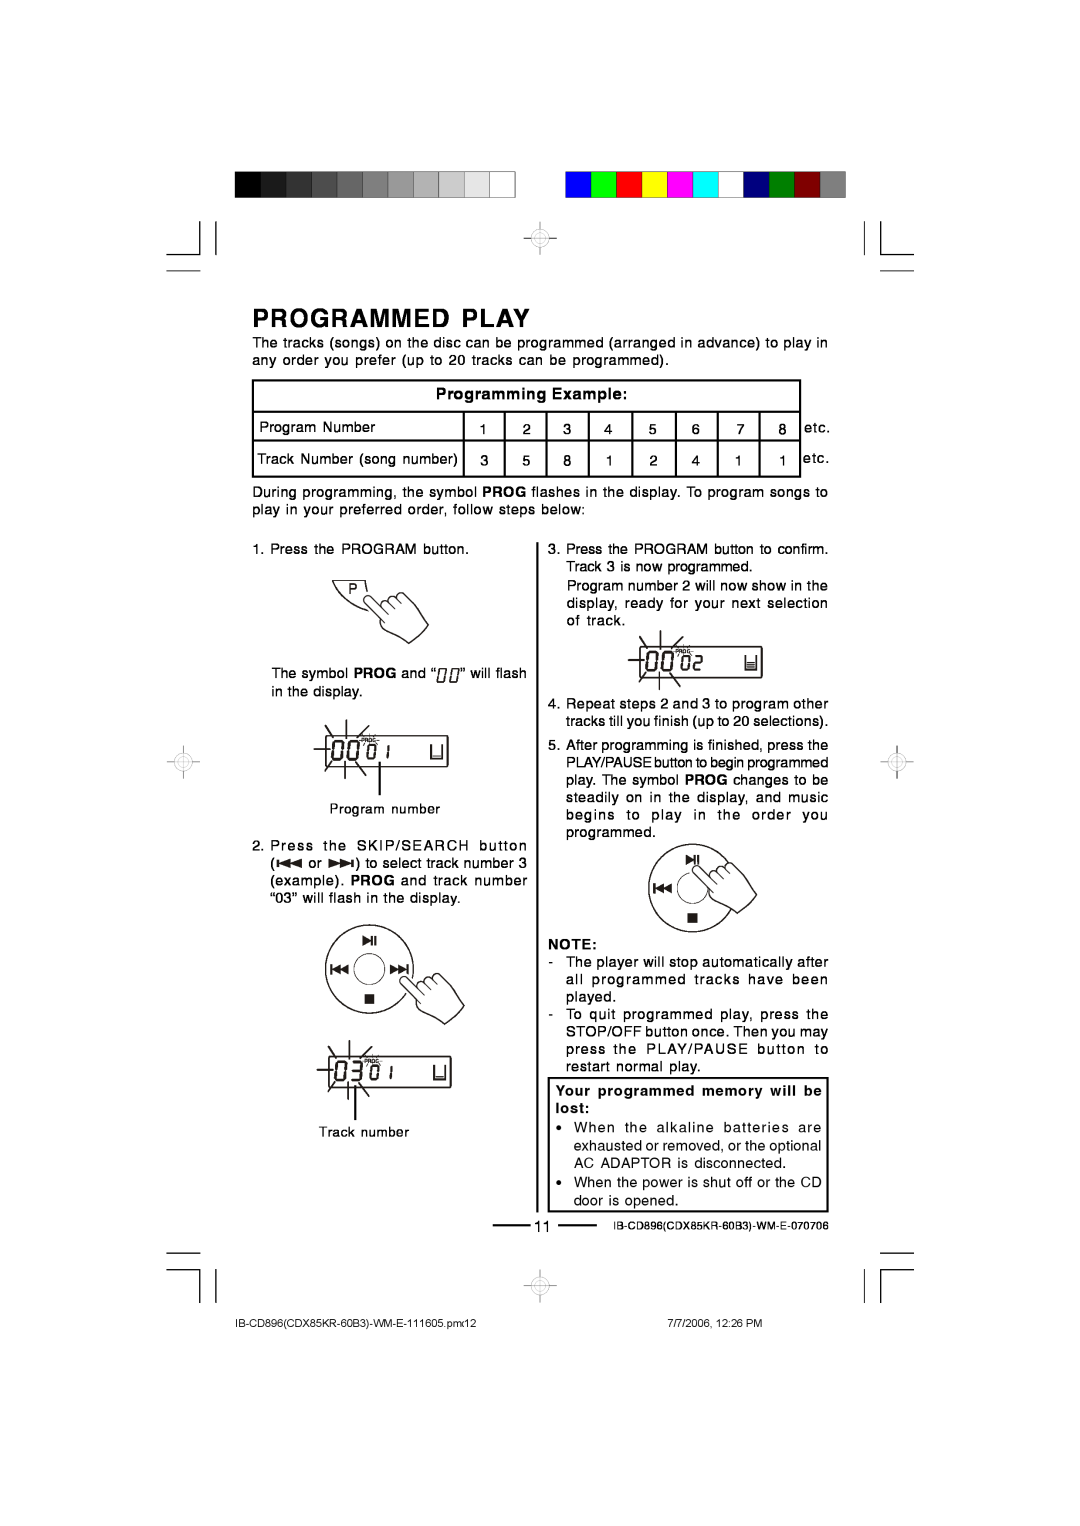 Lenoxx Electronics CD-896 operating instructions Programmed Play, Programming Example, Your programmed memory will be lost 